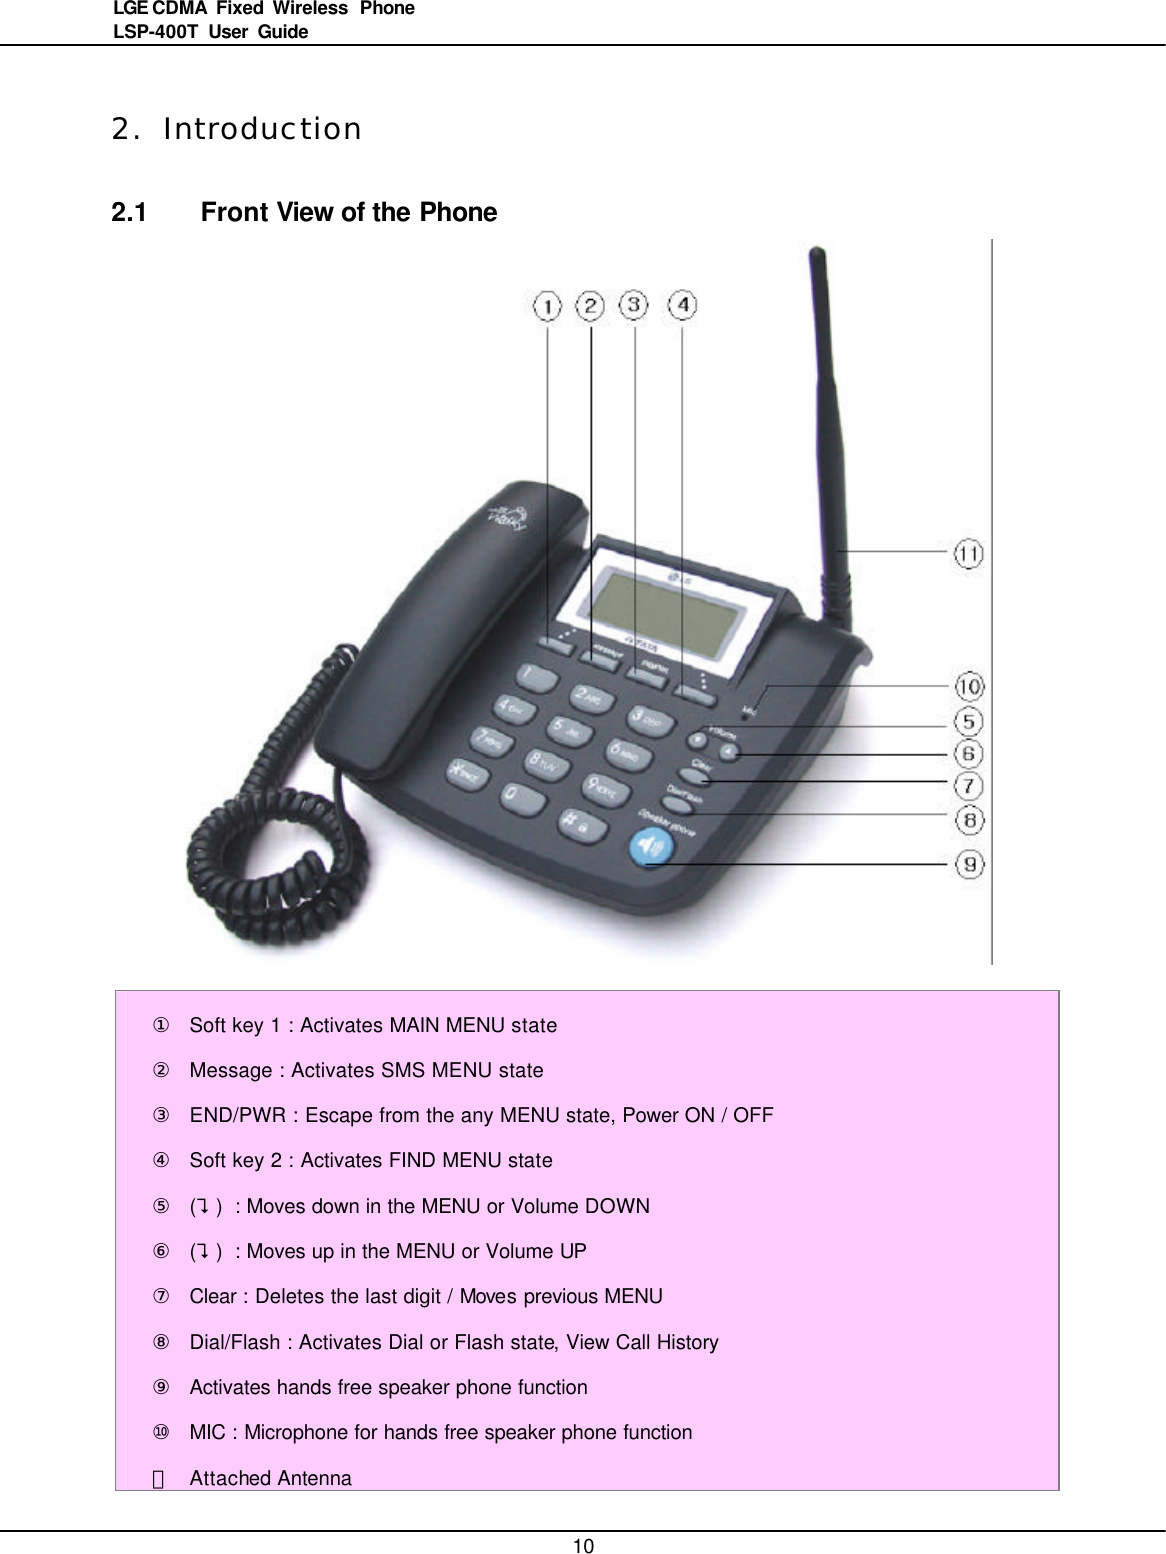   10LGE CDMA Fixed Wireless  Phone LSP-400T  User Guide  2. Introduction 2.1 Front View of the Phone   ① Soft key 1 : Activates MAIN MENU state ② Message : Activates SMS MENU state ③ END/PWR : Escape from the any MENU state, Power ON / OFF ④ Soft key 2 : Activates FIND MENU state ⑤ (?) : Moves down in the MENU or Volume DOWN ⑥ (?) : Moves up in the MENU or Volume UP ⑦ Clear : Deletes the last digit / Moves previous MENU ⑧ Dial/Flash : Activates Dial or Flash state, View Call History ⑨ Activates hands free speaker phone function ⑩ MIC : Microphone for hands free speaker phone function ⑪ Attached Antenna 